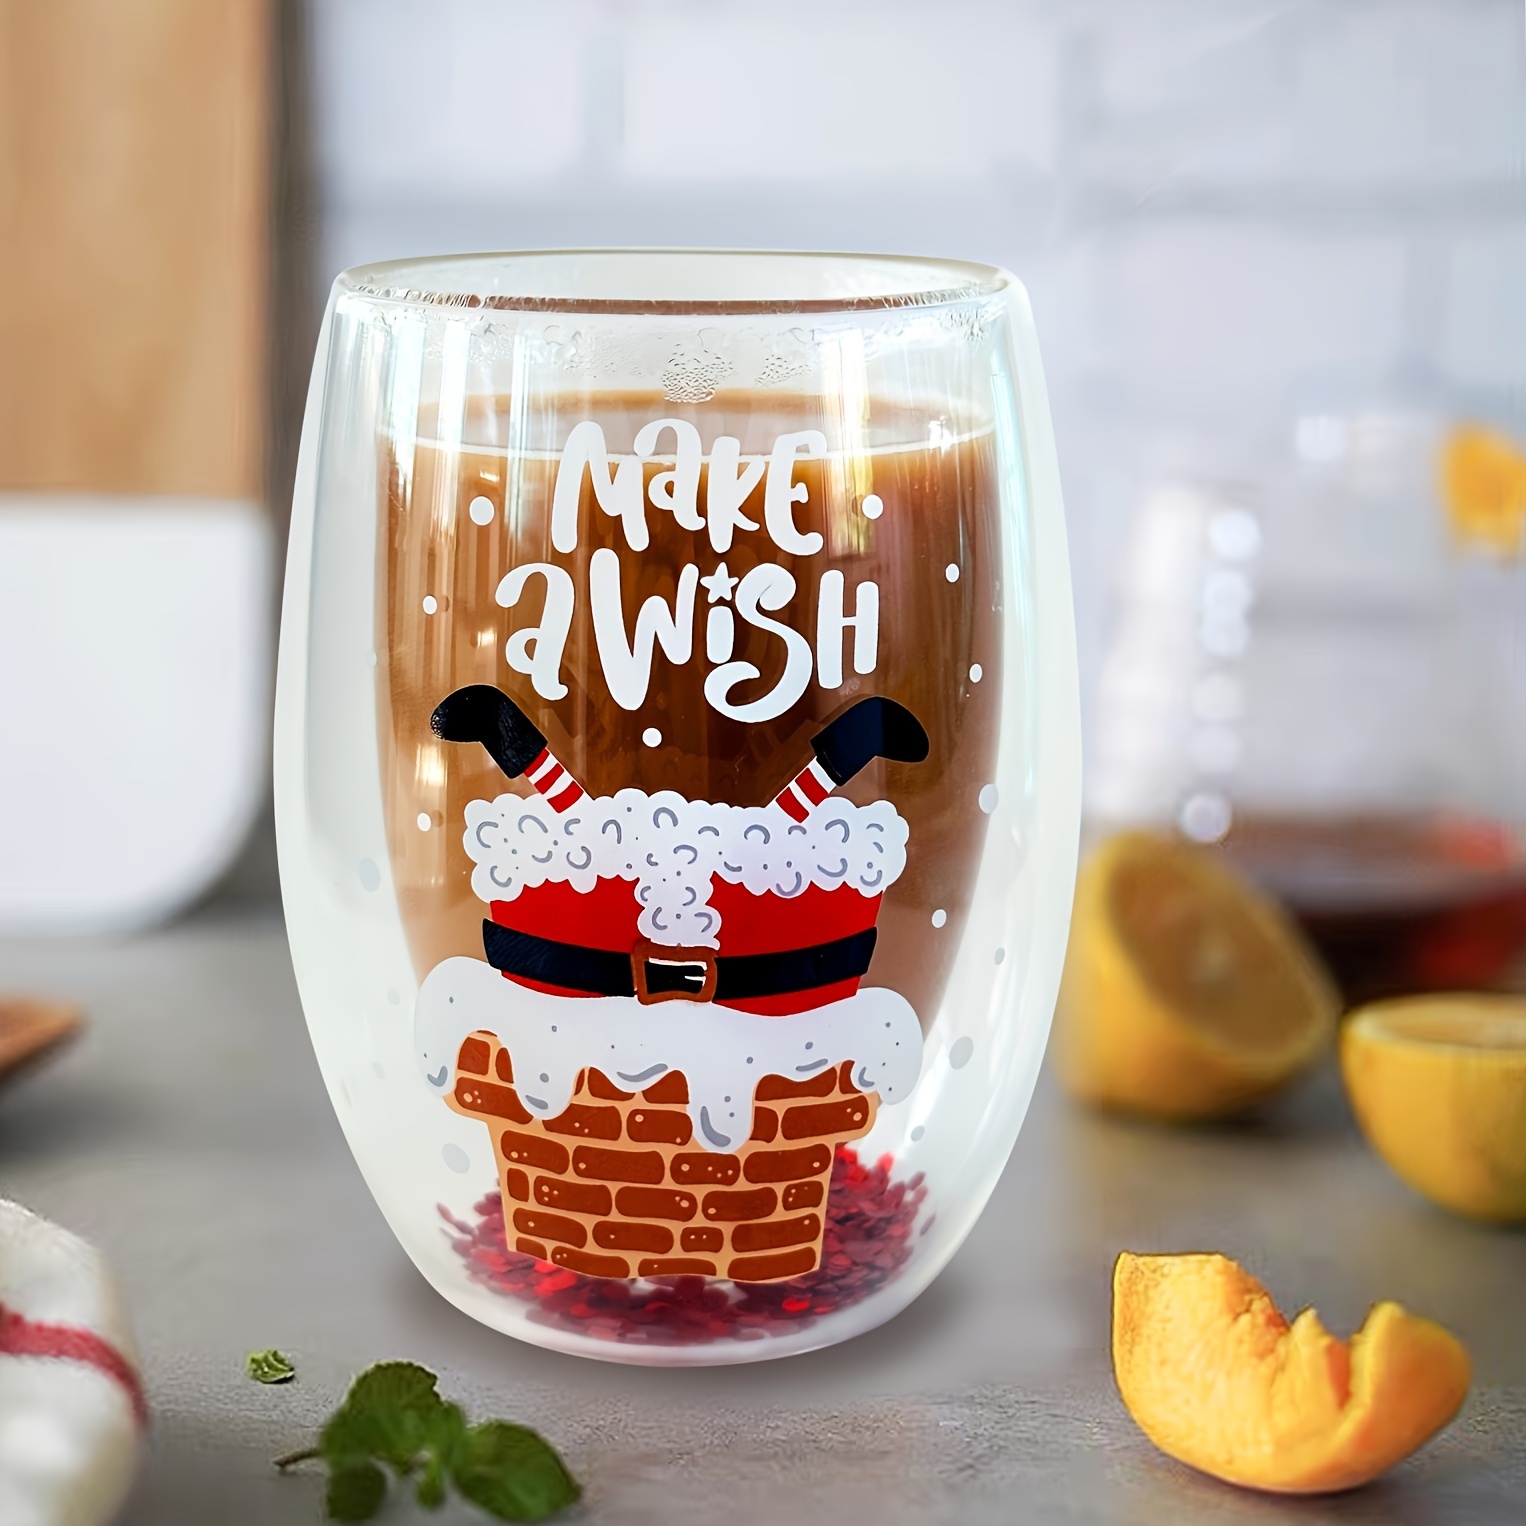 4pcs, Santa Cartoon Drinking Glasses, Double Wall Heat Insulated Espresso  Coffee Cups, Christmas Fun Gift, Suitable For Christmas Holiday Family Lover